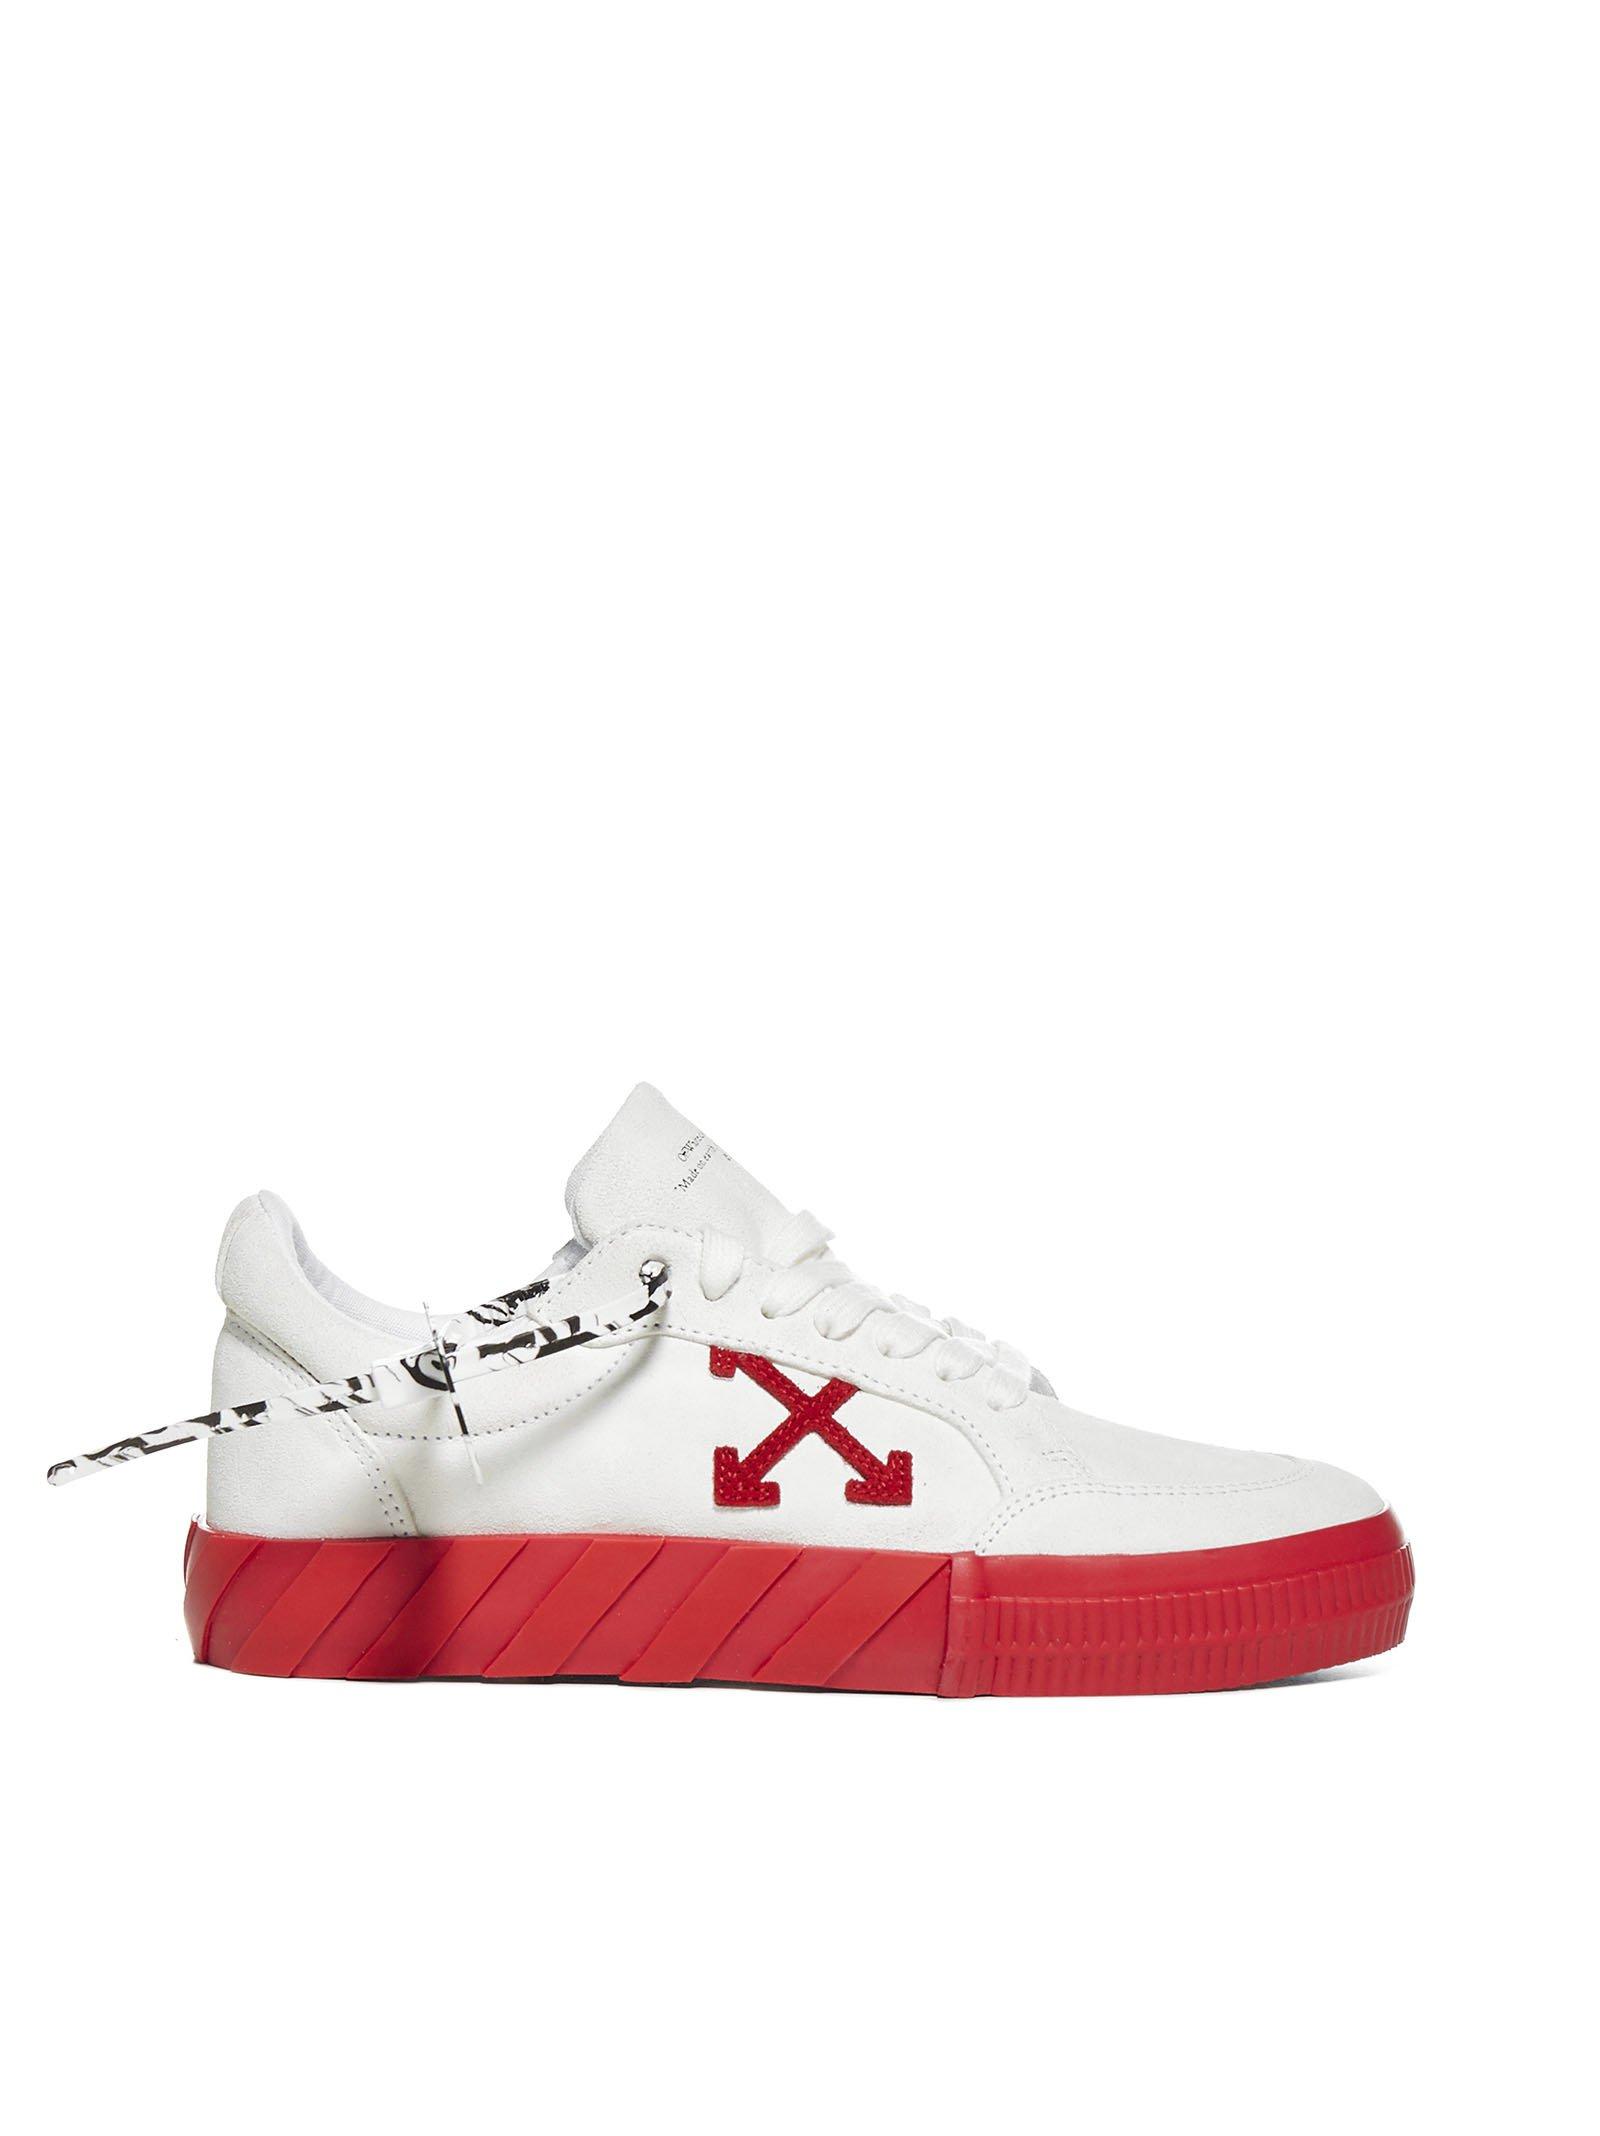 c/o Virgil Abloh White And Red Suede Low Sneakers for Men -